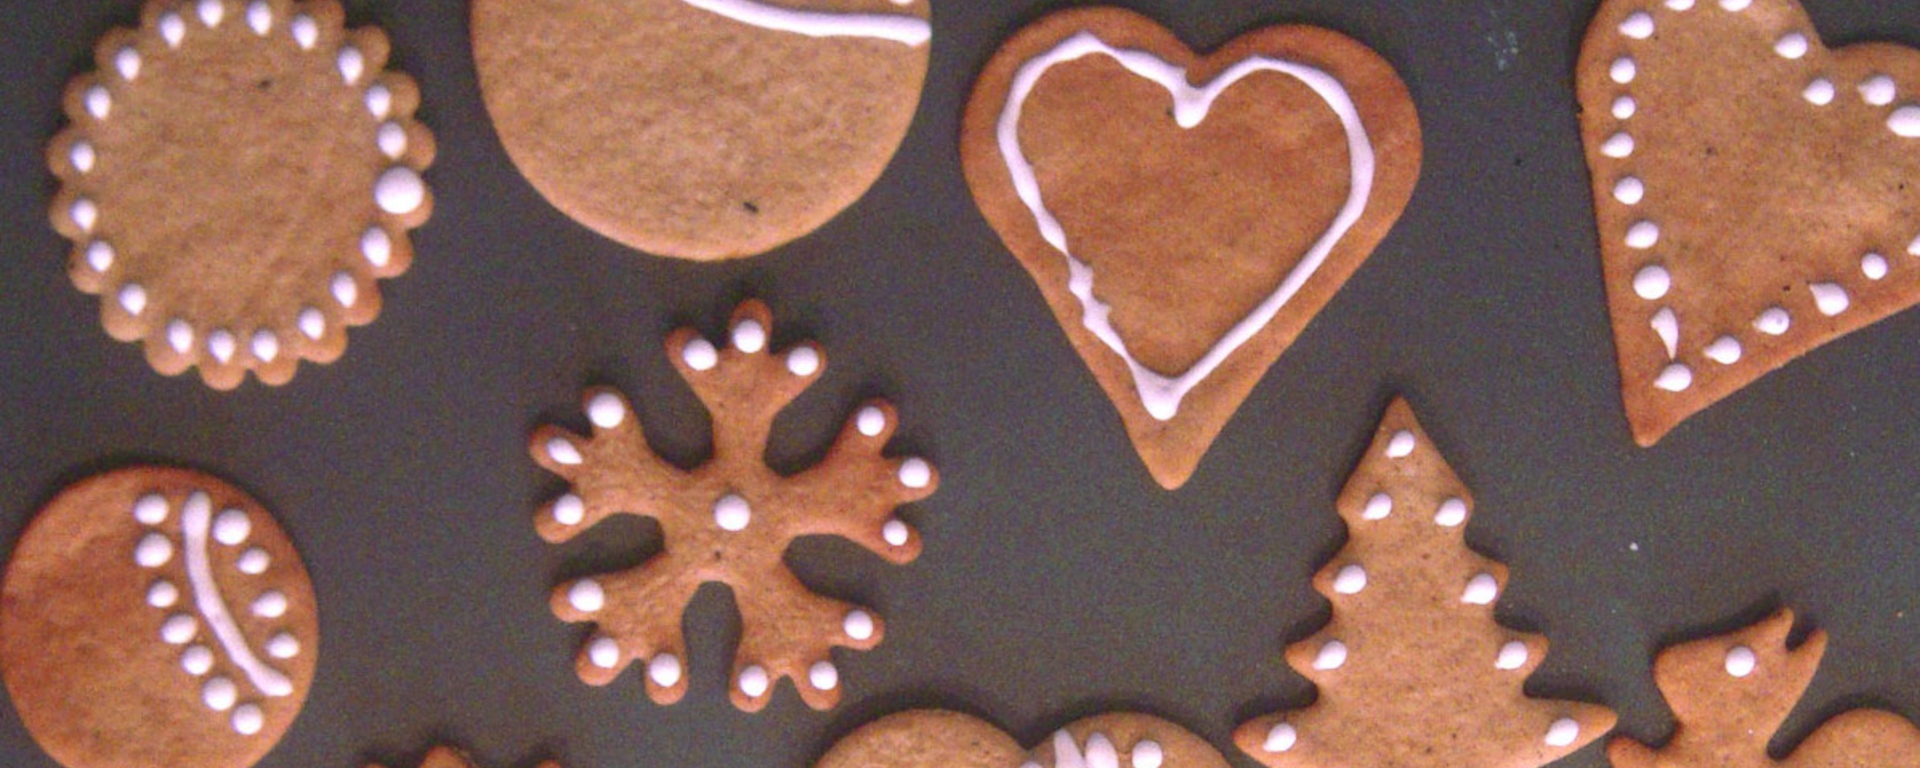 LuvMyRecipe.com - Pepparkakor (Nordic Ginger Cookies) Featured